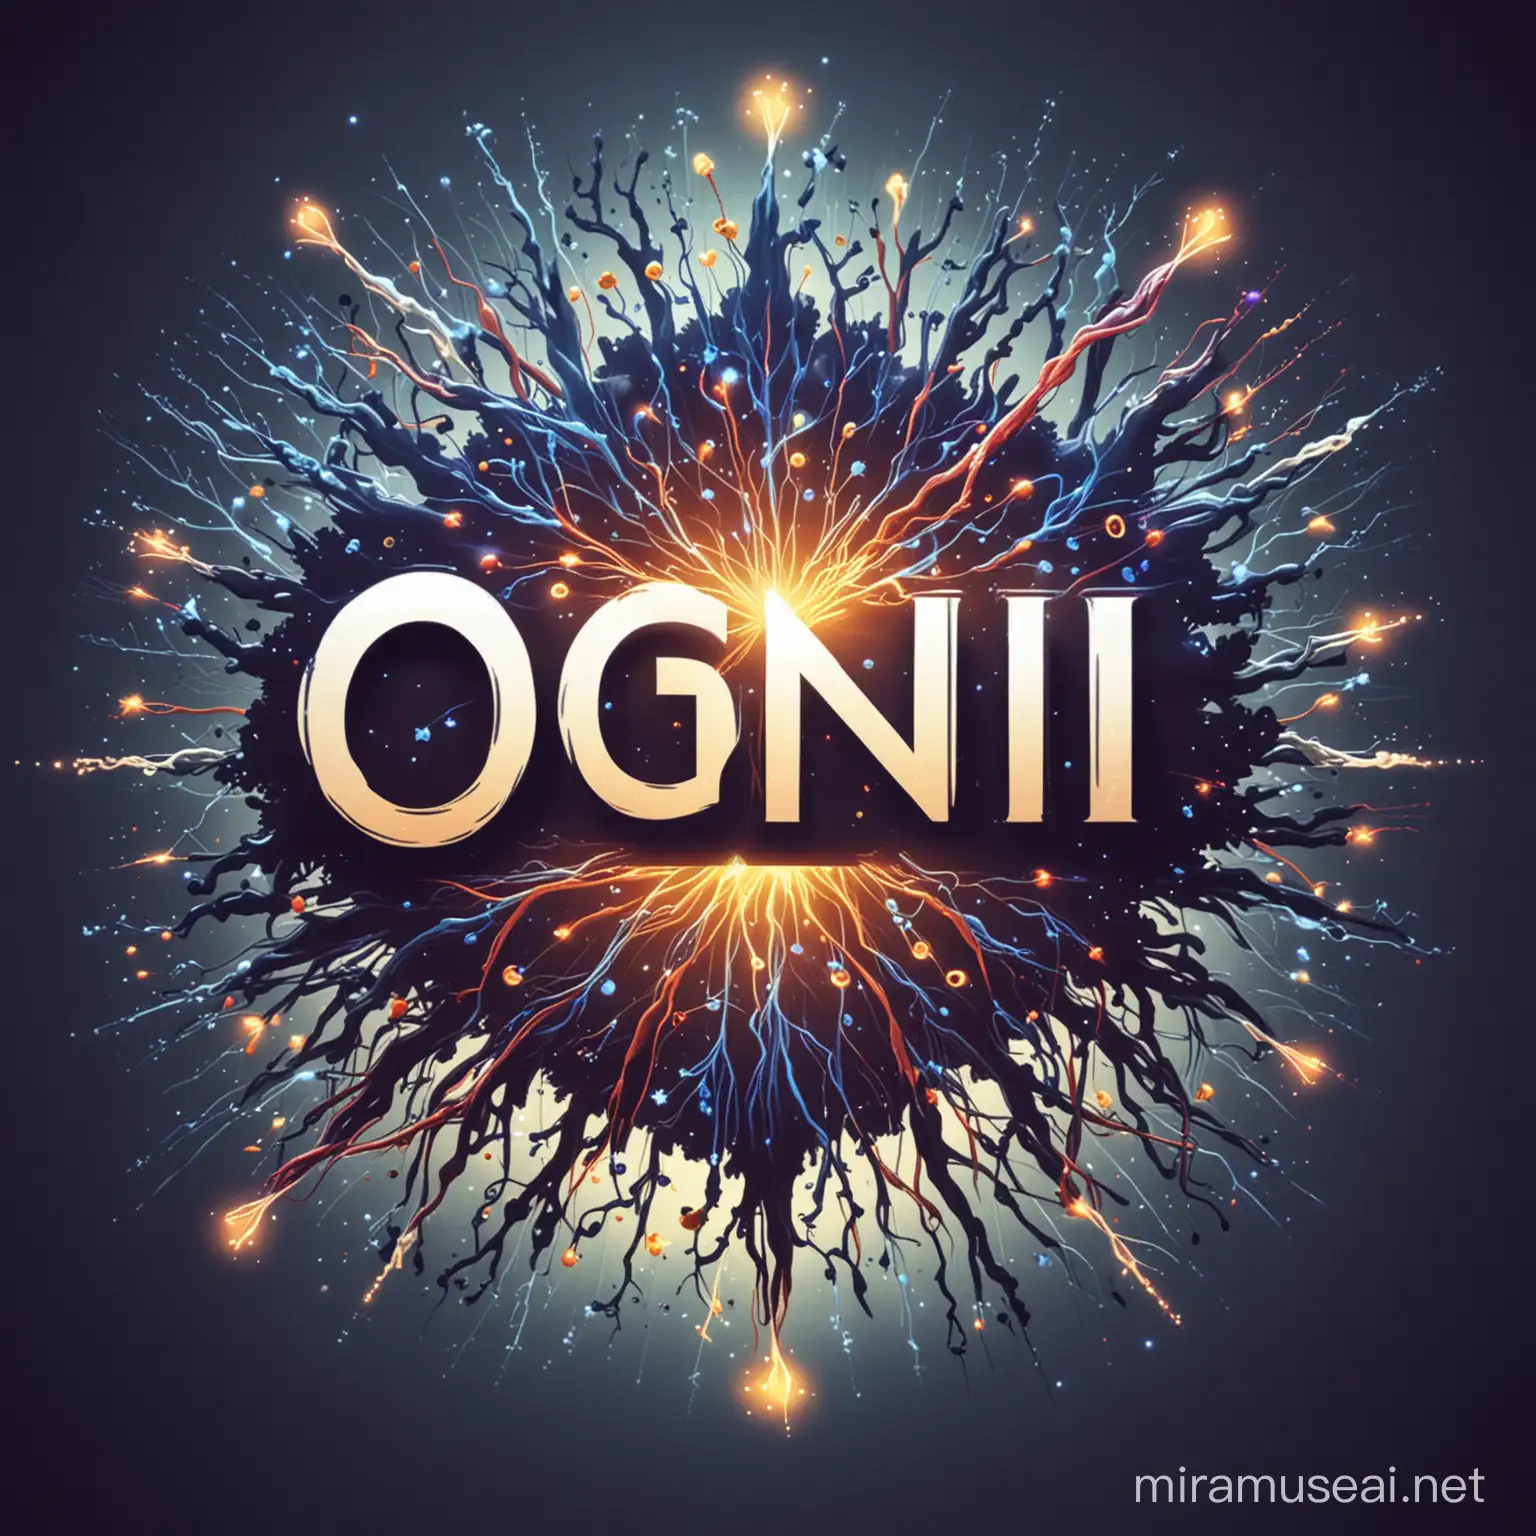 OGNI Educational Center Logo Glowing Neurons and Fireworks